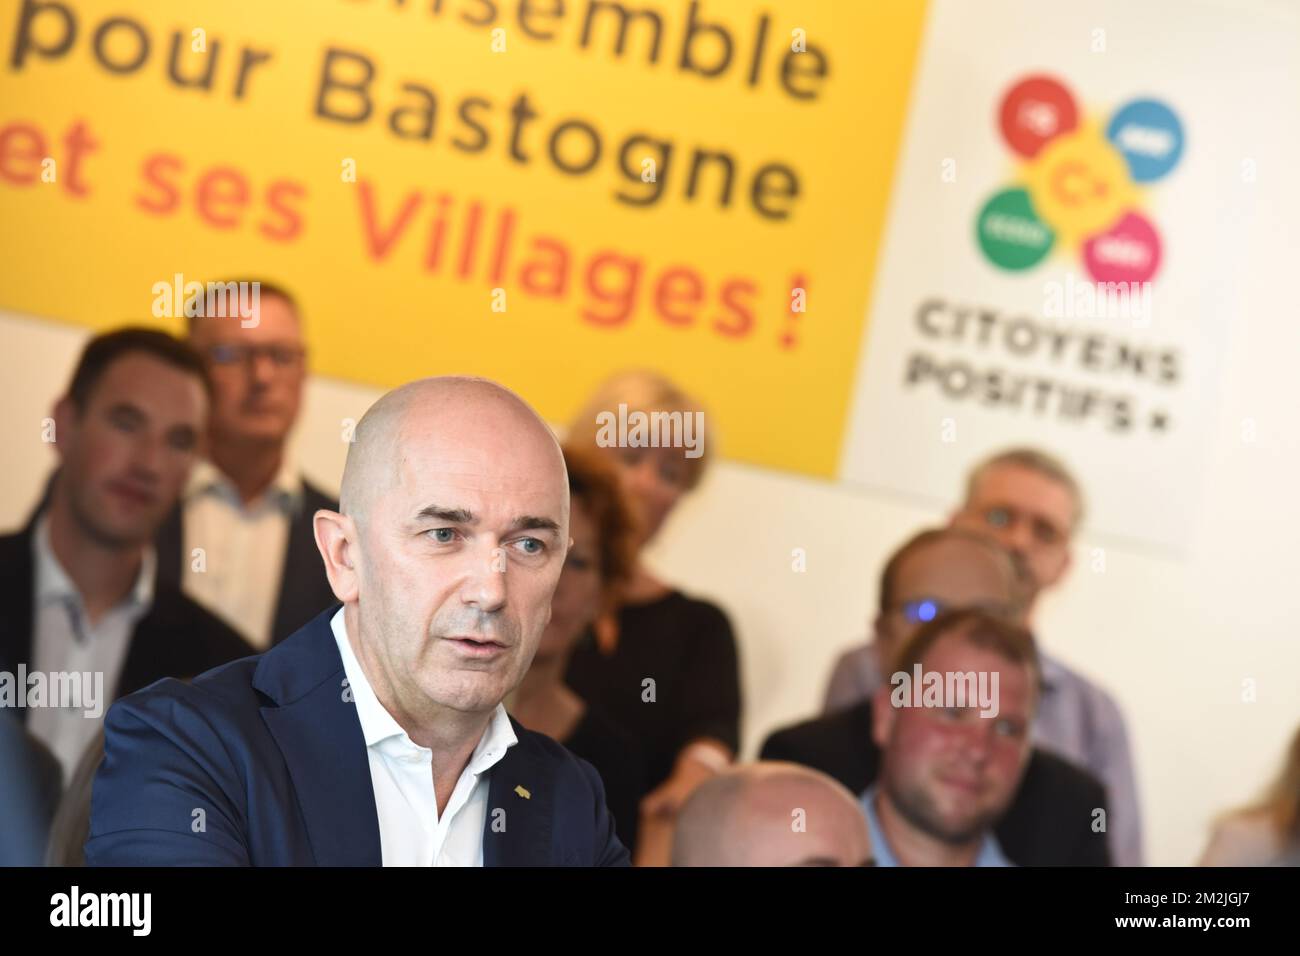 Jean Pierre Lutgen pictured during the presentation of the local list 'Citoyens +' for the upcoming local elections in Bastogne, Tuesday 11 September 2018. BELGA PHOTO JEAN-LUC FLEMAL Stock Photo